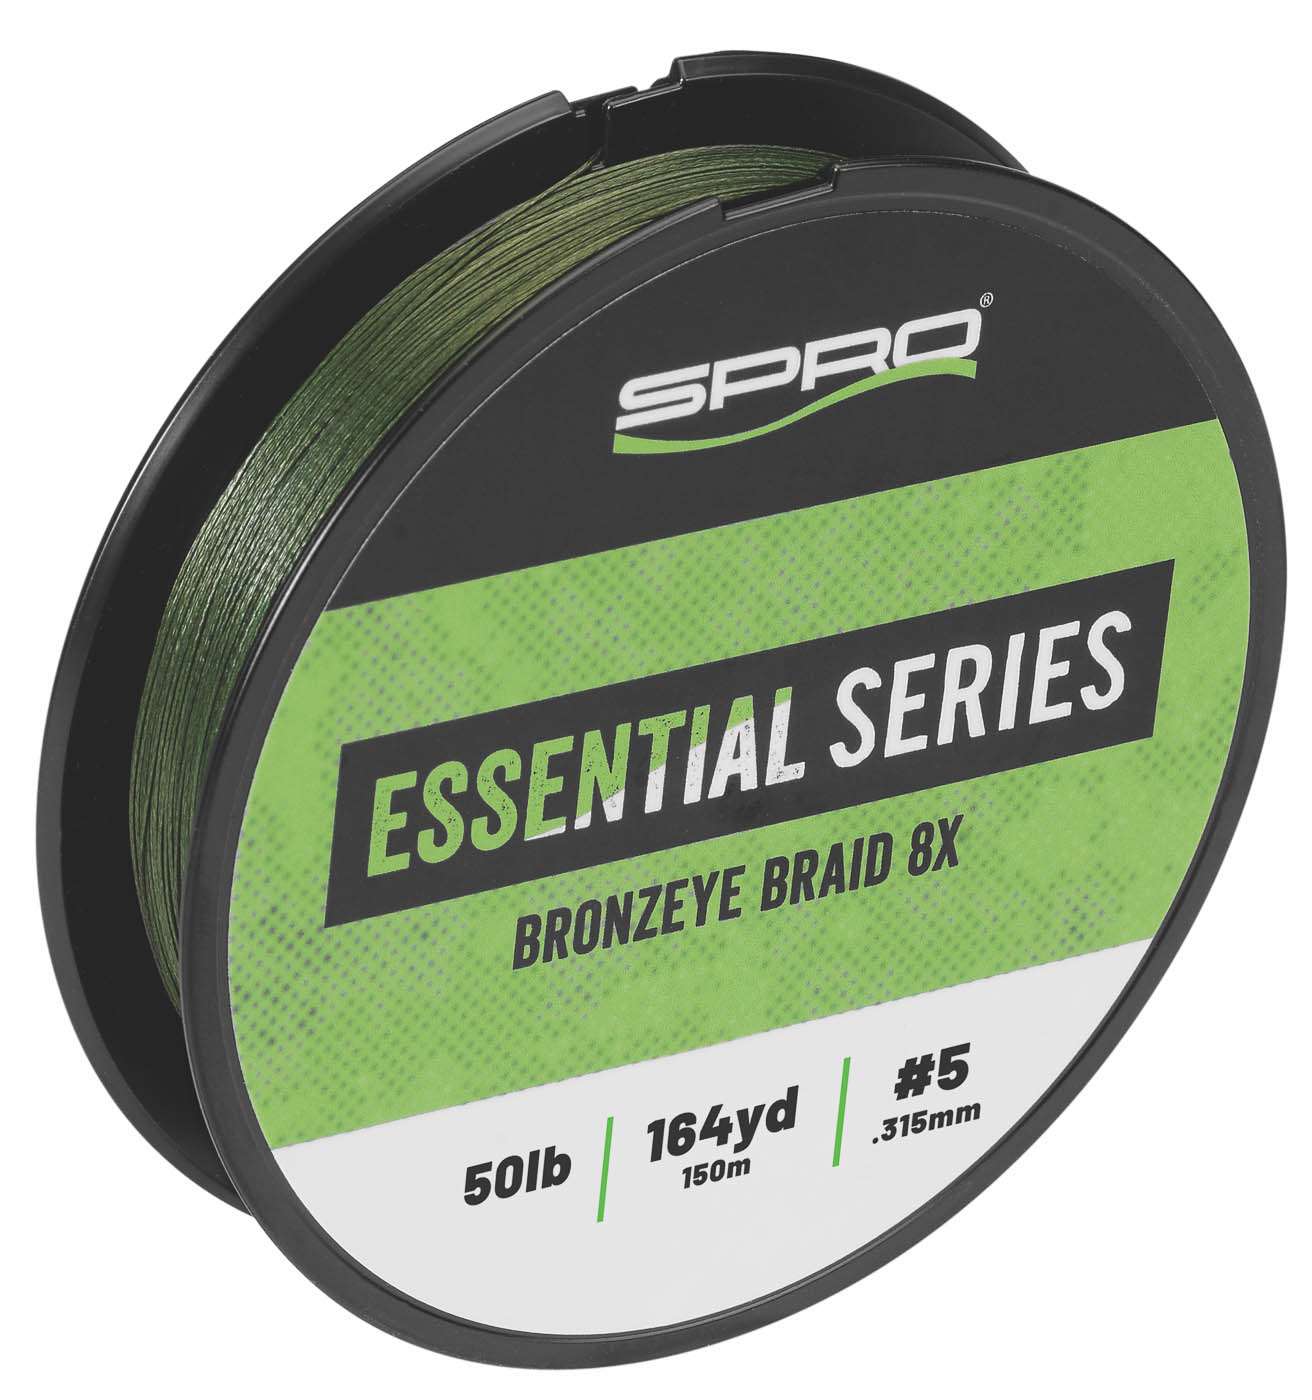 <p><strong>Spro Bronzeye Braid</strong></p><p>SPRO introduces the Bronzeye Braid 8x, available in 40-, 50-, 60- and 80-pound test. <a href=